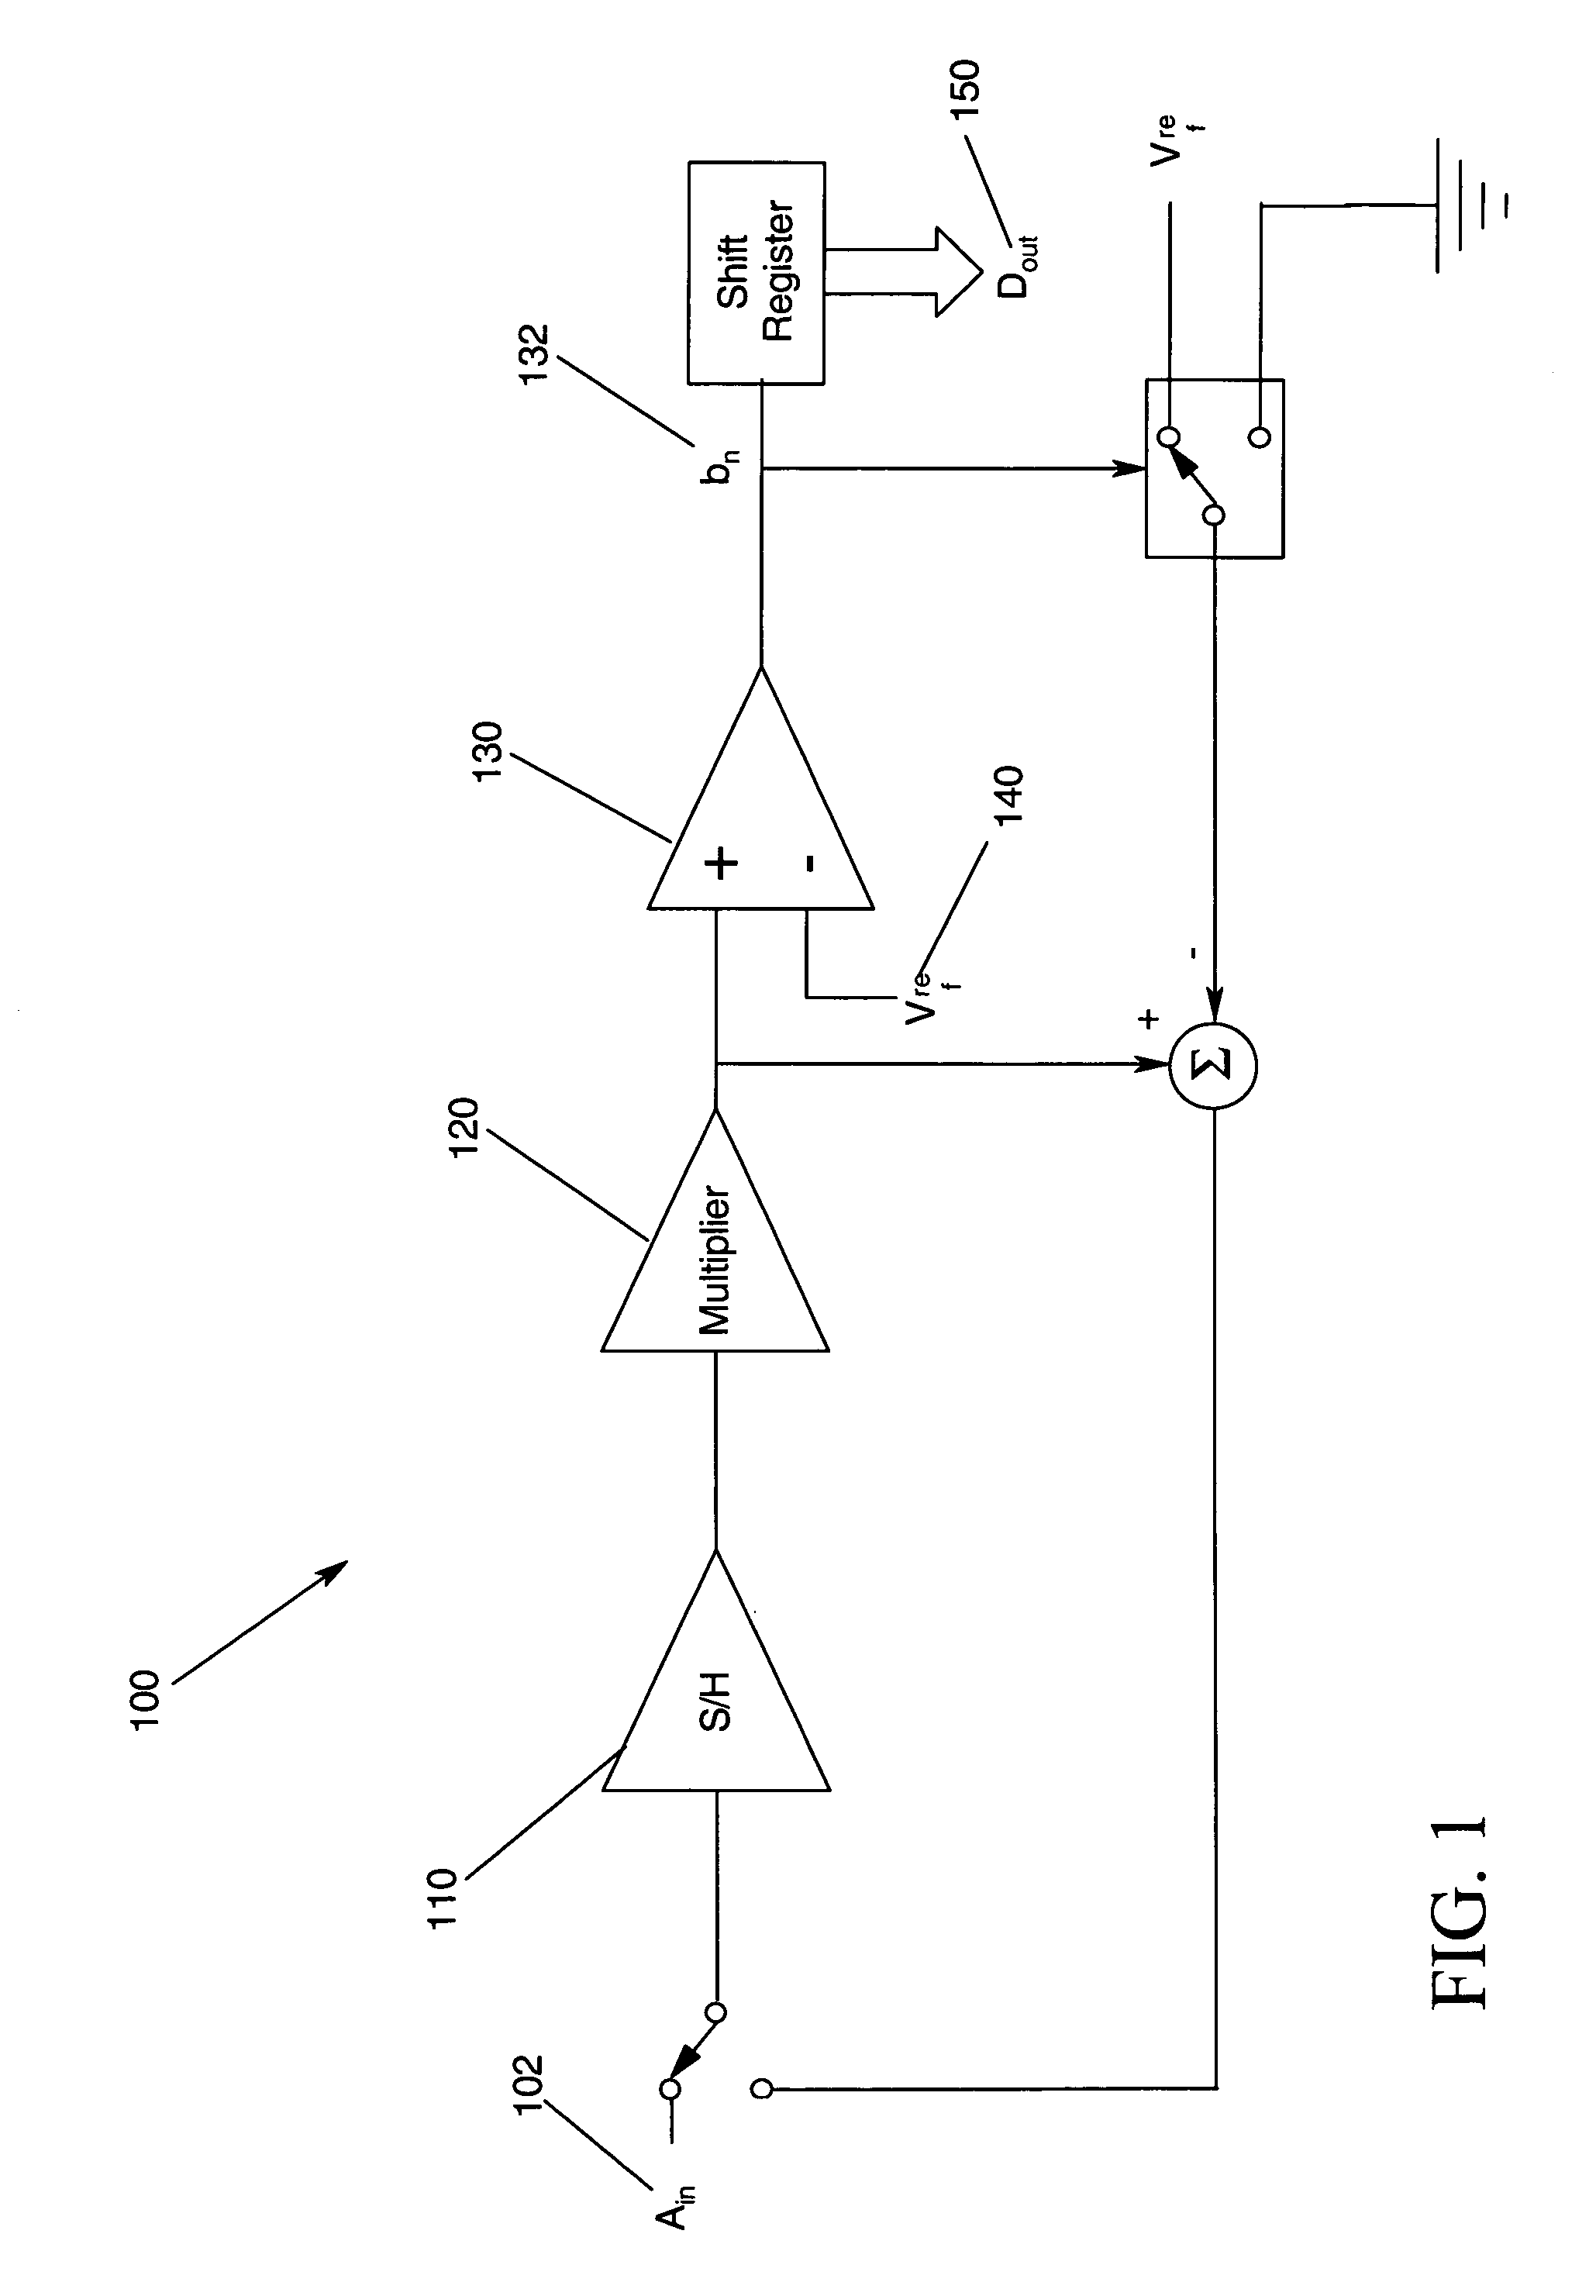 Method and apparatus for providing high common-mode rejection ratio in a single-ended CMOS operational transconductance amplifier